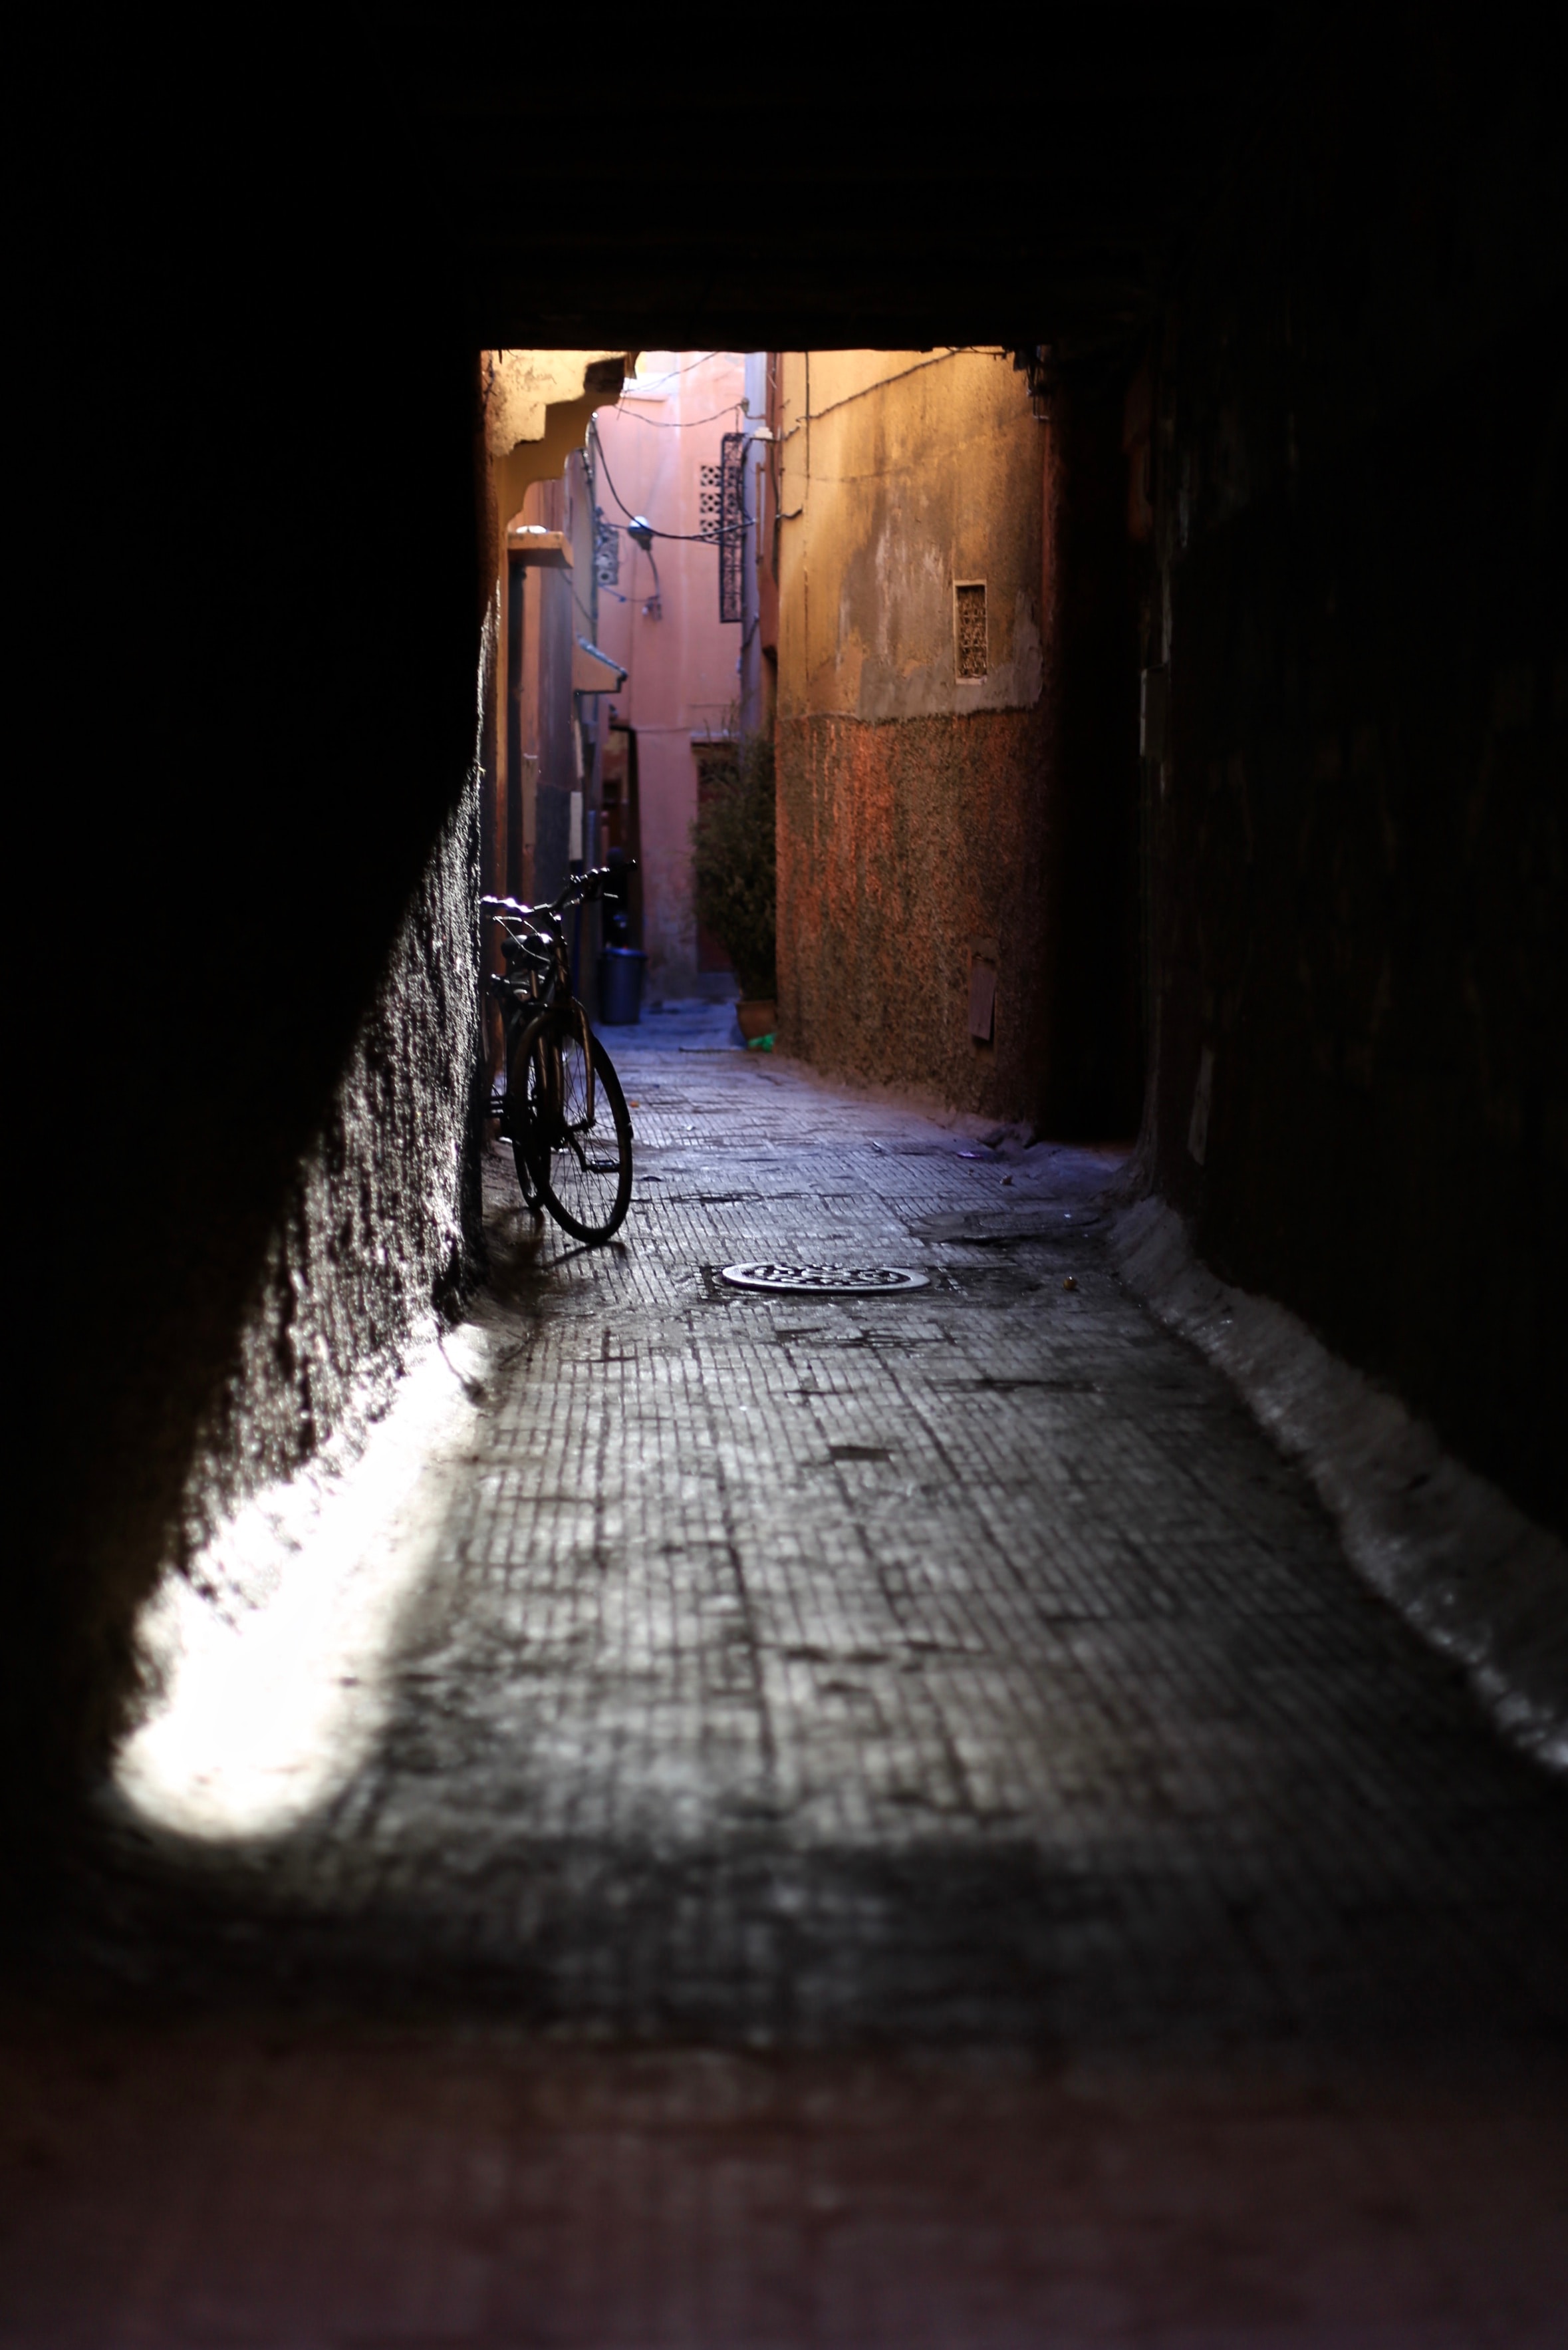 76637 Screensavers and Wallpapers Bicycle for phone. Download bicycle, dark, shine, light, tunnel, lane pictures for free